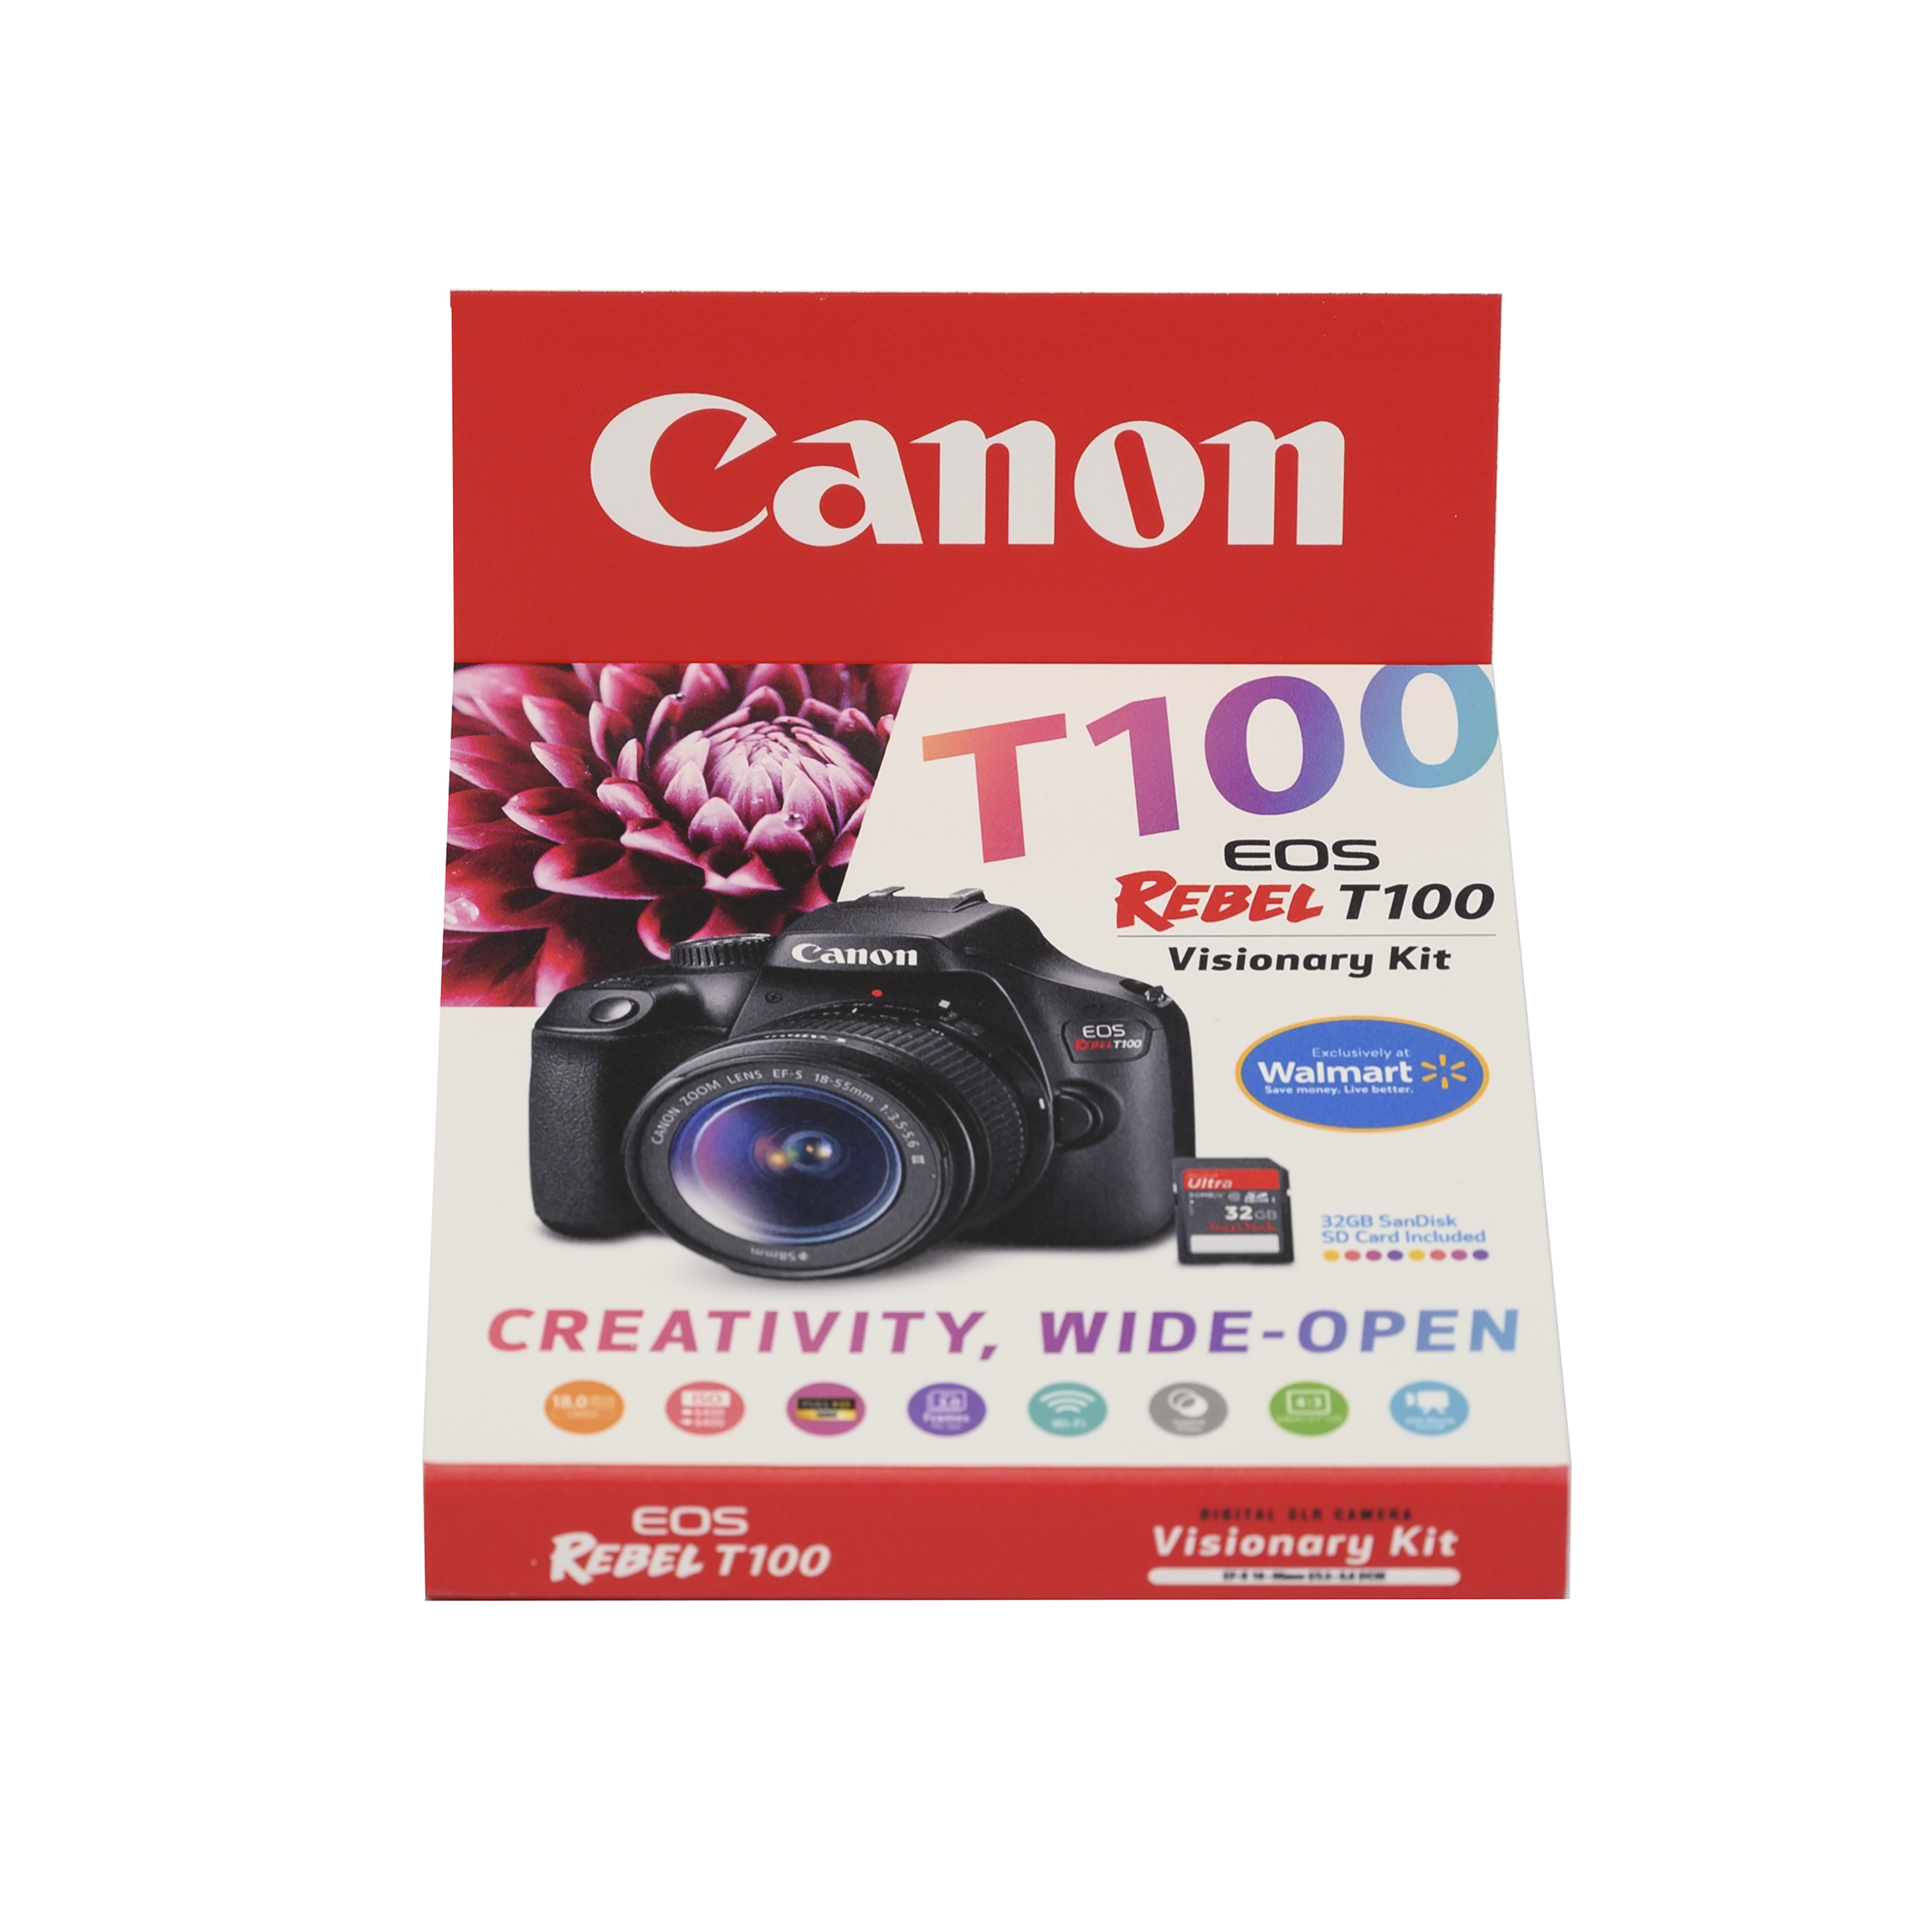 Retail POP Counter Display For Canon Rebel Camera